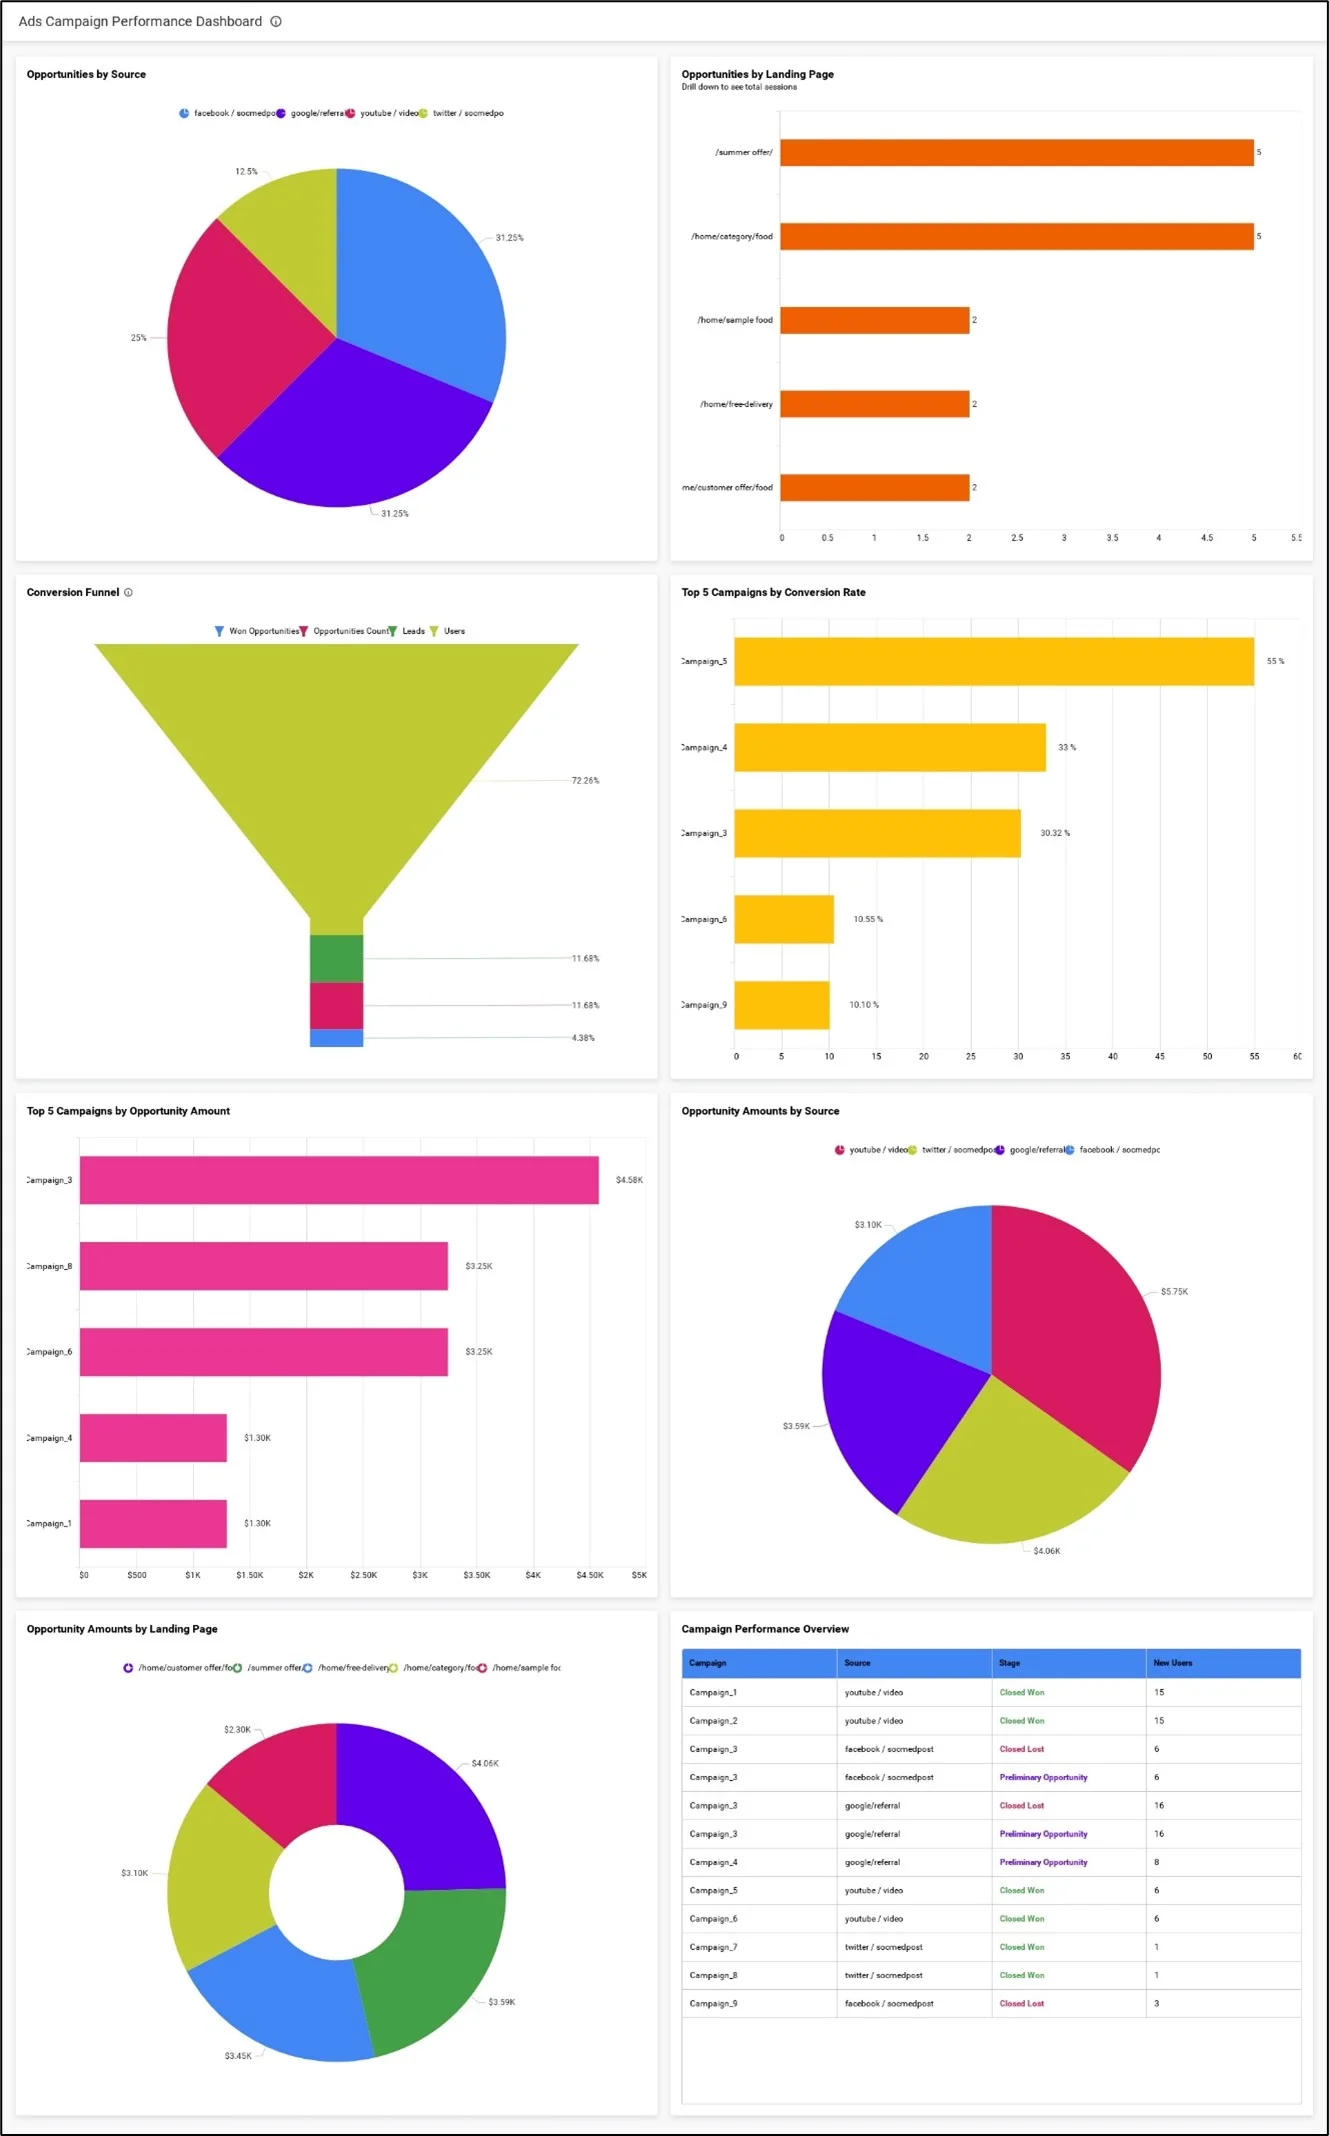 Ads Campaign Performance Dashboard